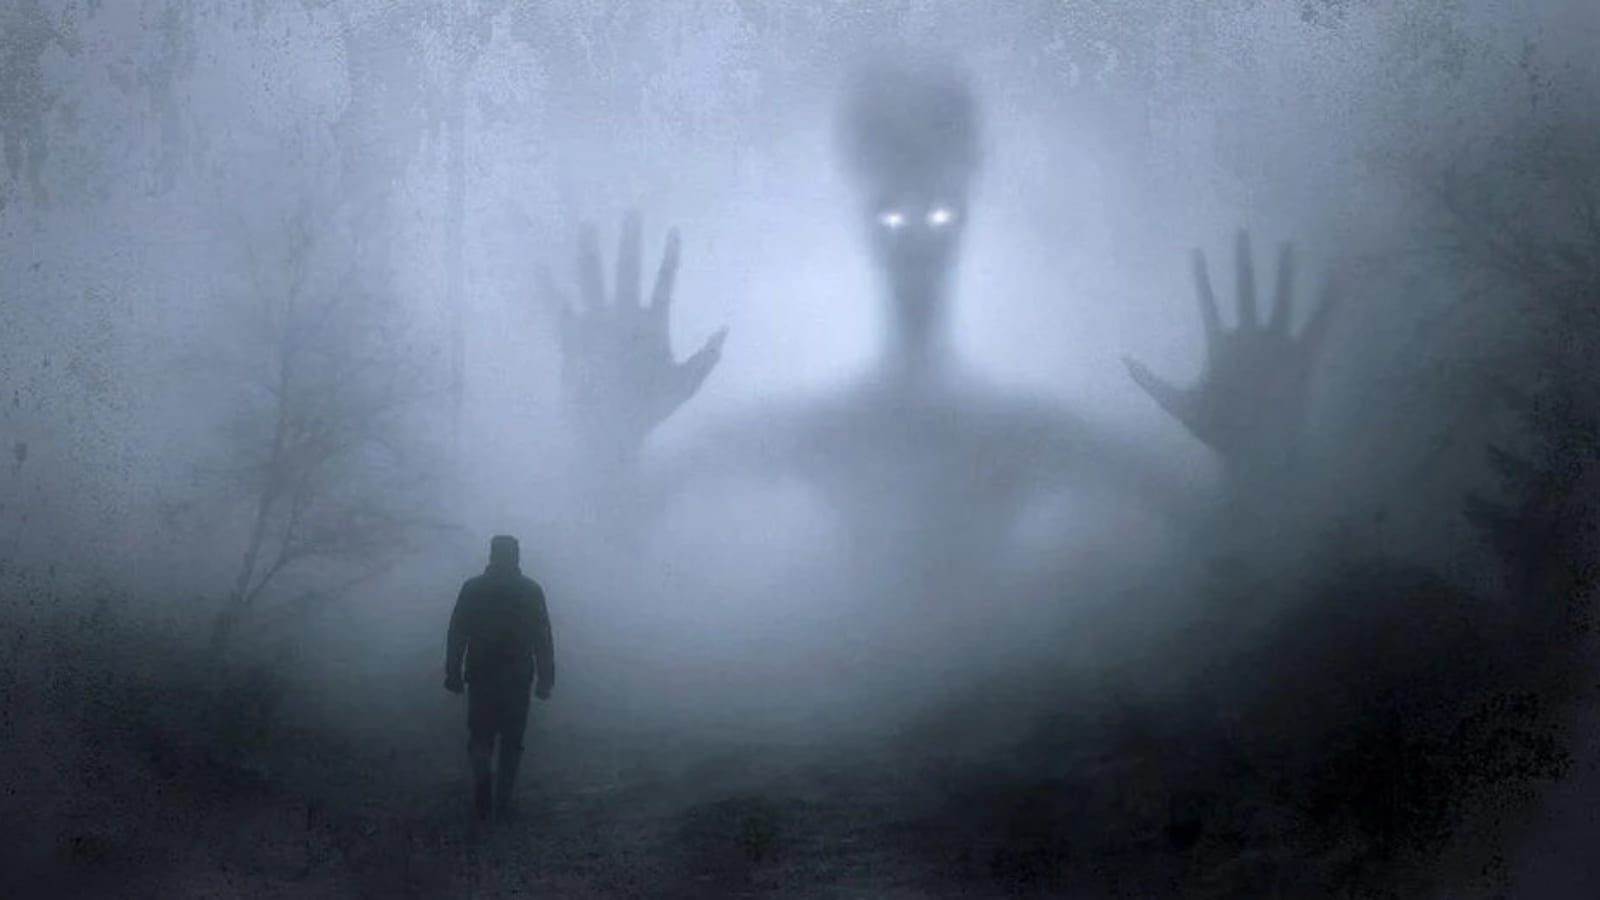 Man in a Foggy Forest with a Large Entity in the Background - Visual Representation of a Nightmare